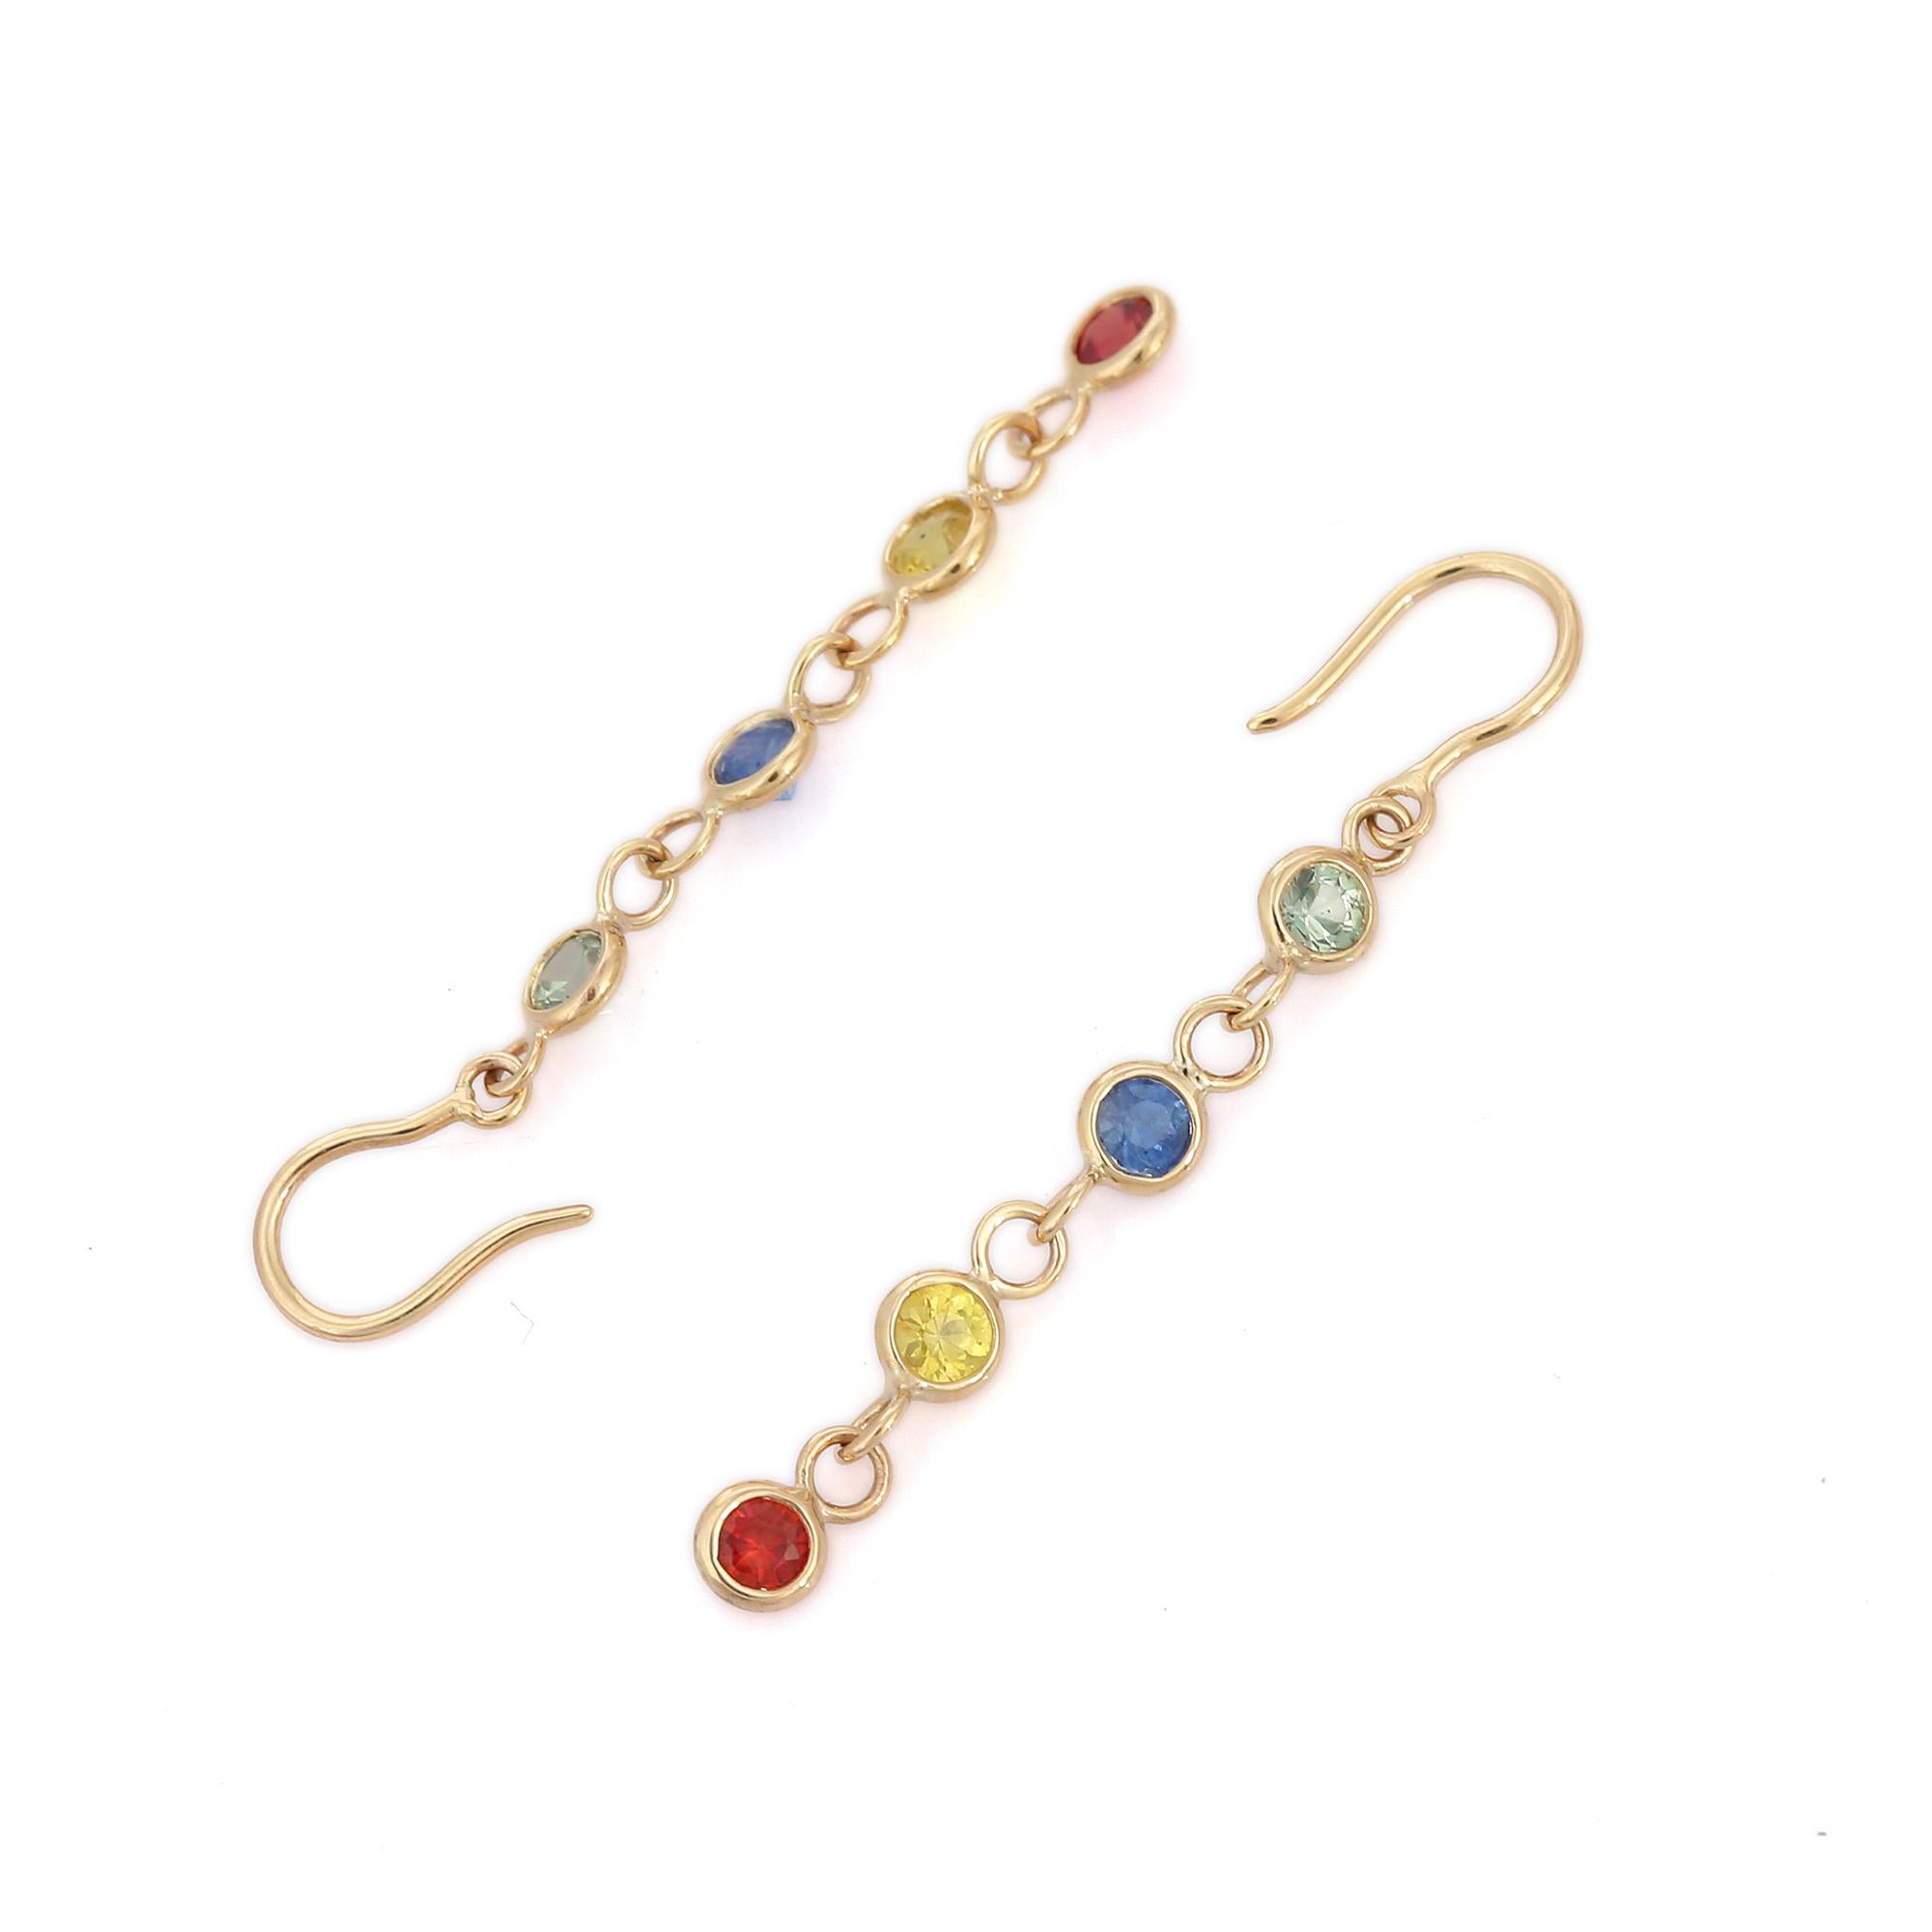 You shall need multi sapphire linear dangle earrings to make a statement with your look. These earrings create a sparkling, luxurious look featuring round cut gemstone.
If you love to gravitate towards unique styles, this piece of jewelry is perfect